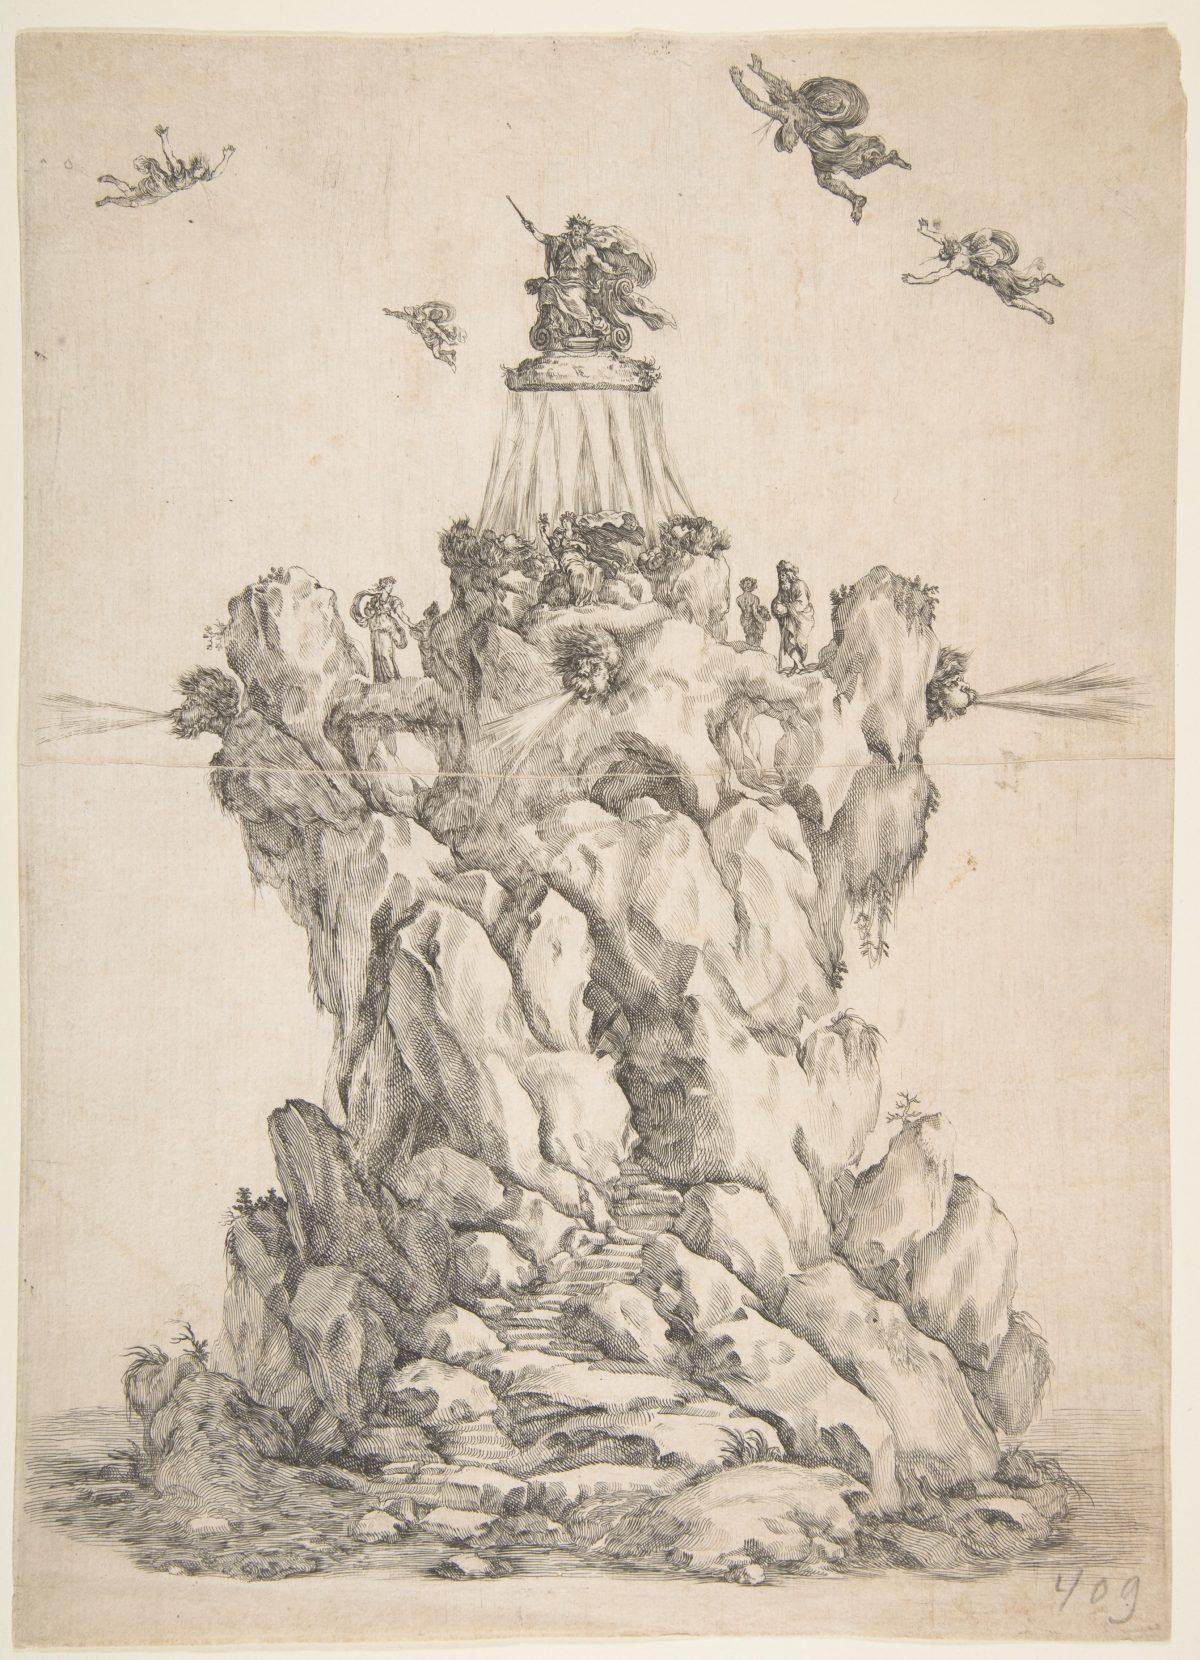 An etching from “The Contest of the Seasons,” depicting the Rock of Aeolus, 1652, by Stefano della Bella. Bequest of Phyllis Massar, 2011, The Metropolitan Museum of Art. (Public Domain)